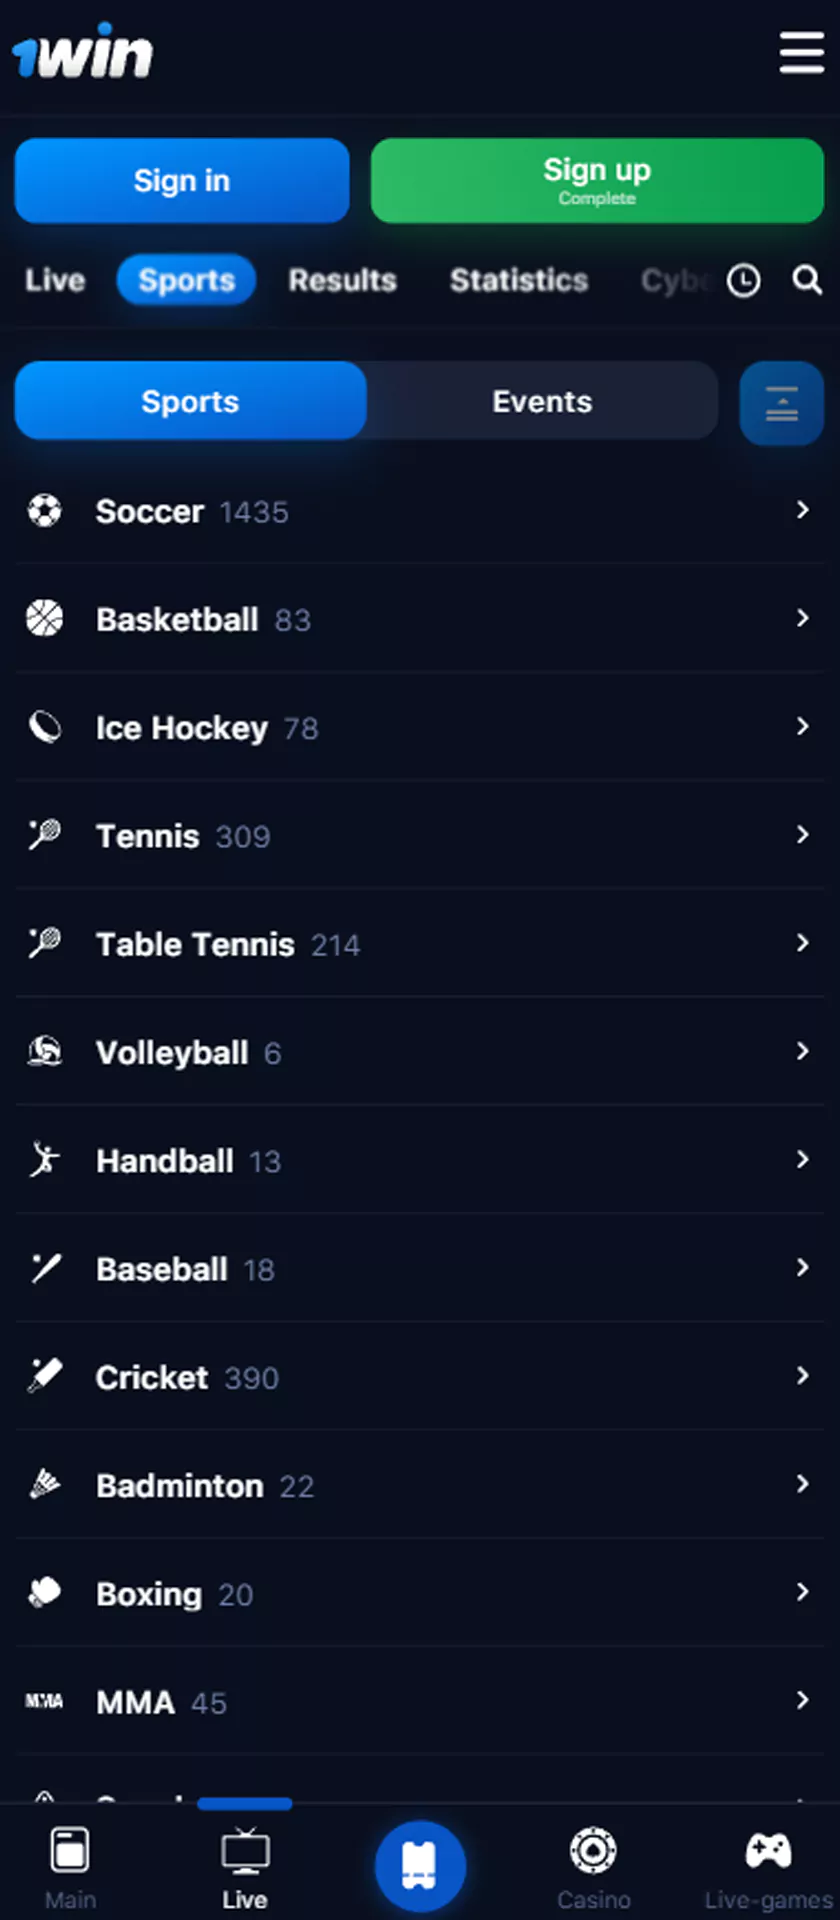 1win app sports betting section.